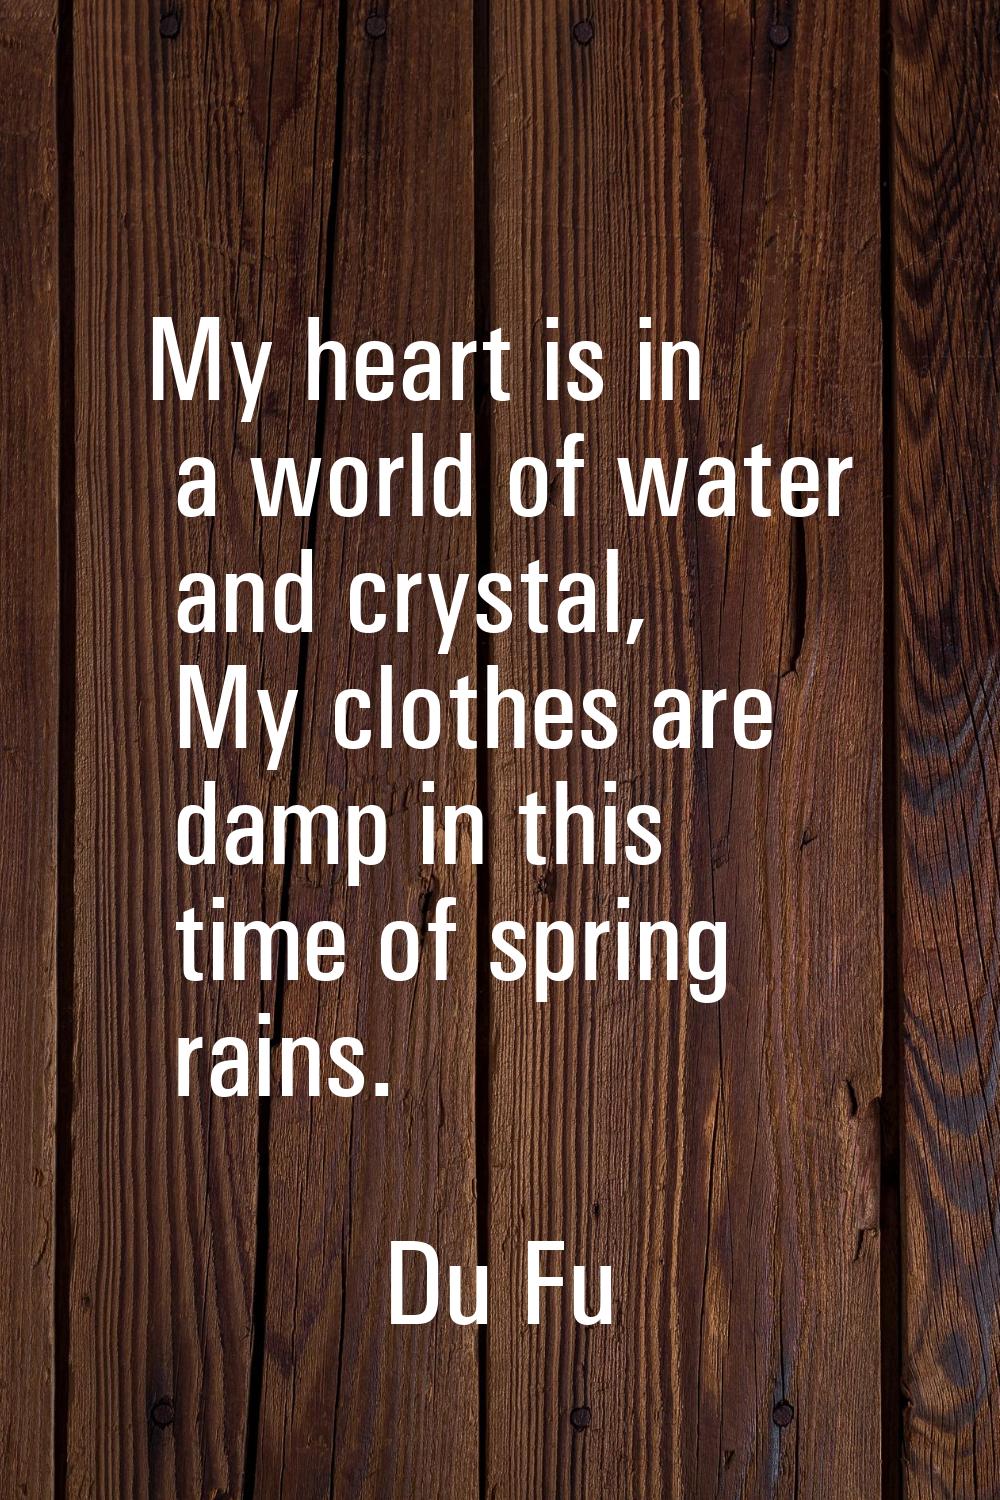 My heart is in a world of water and crystal, My clothes are damp in this time of spring rains.